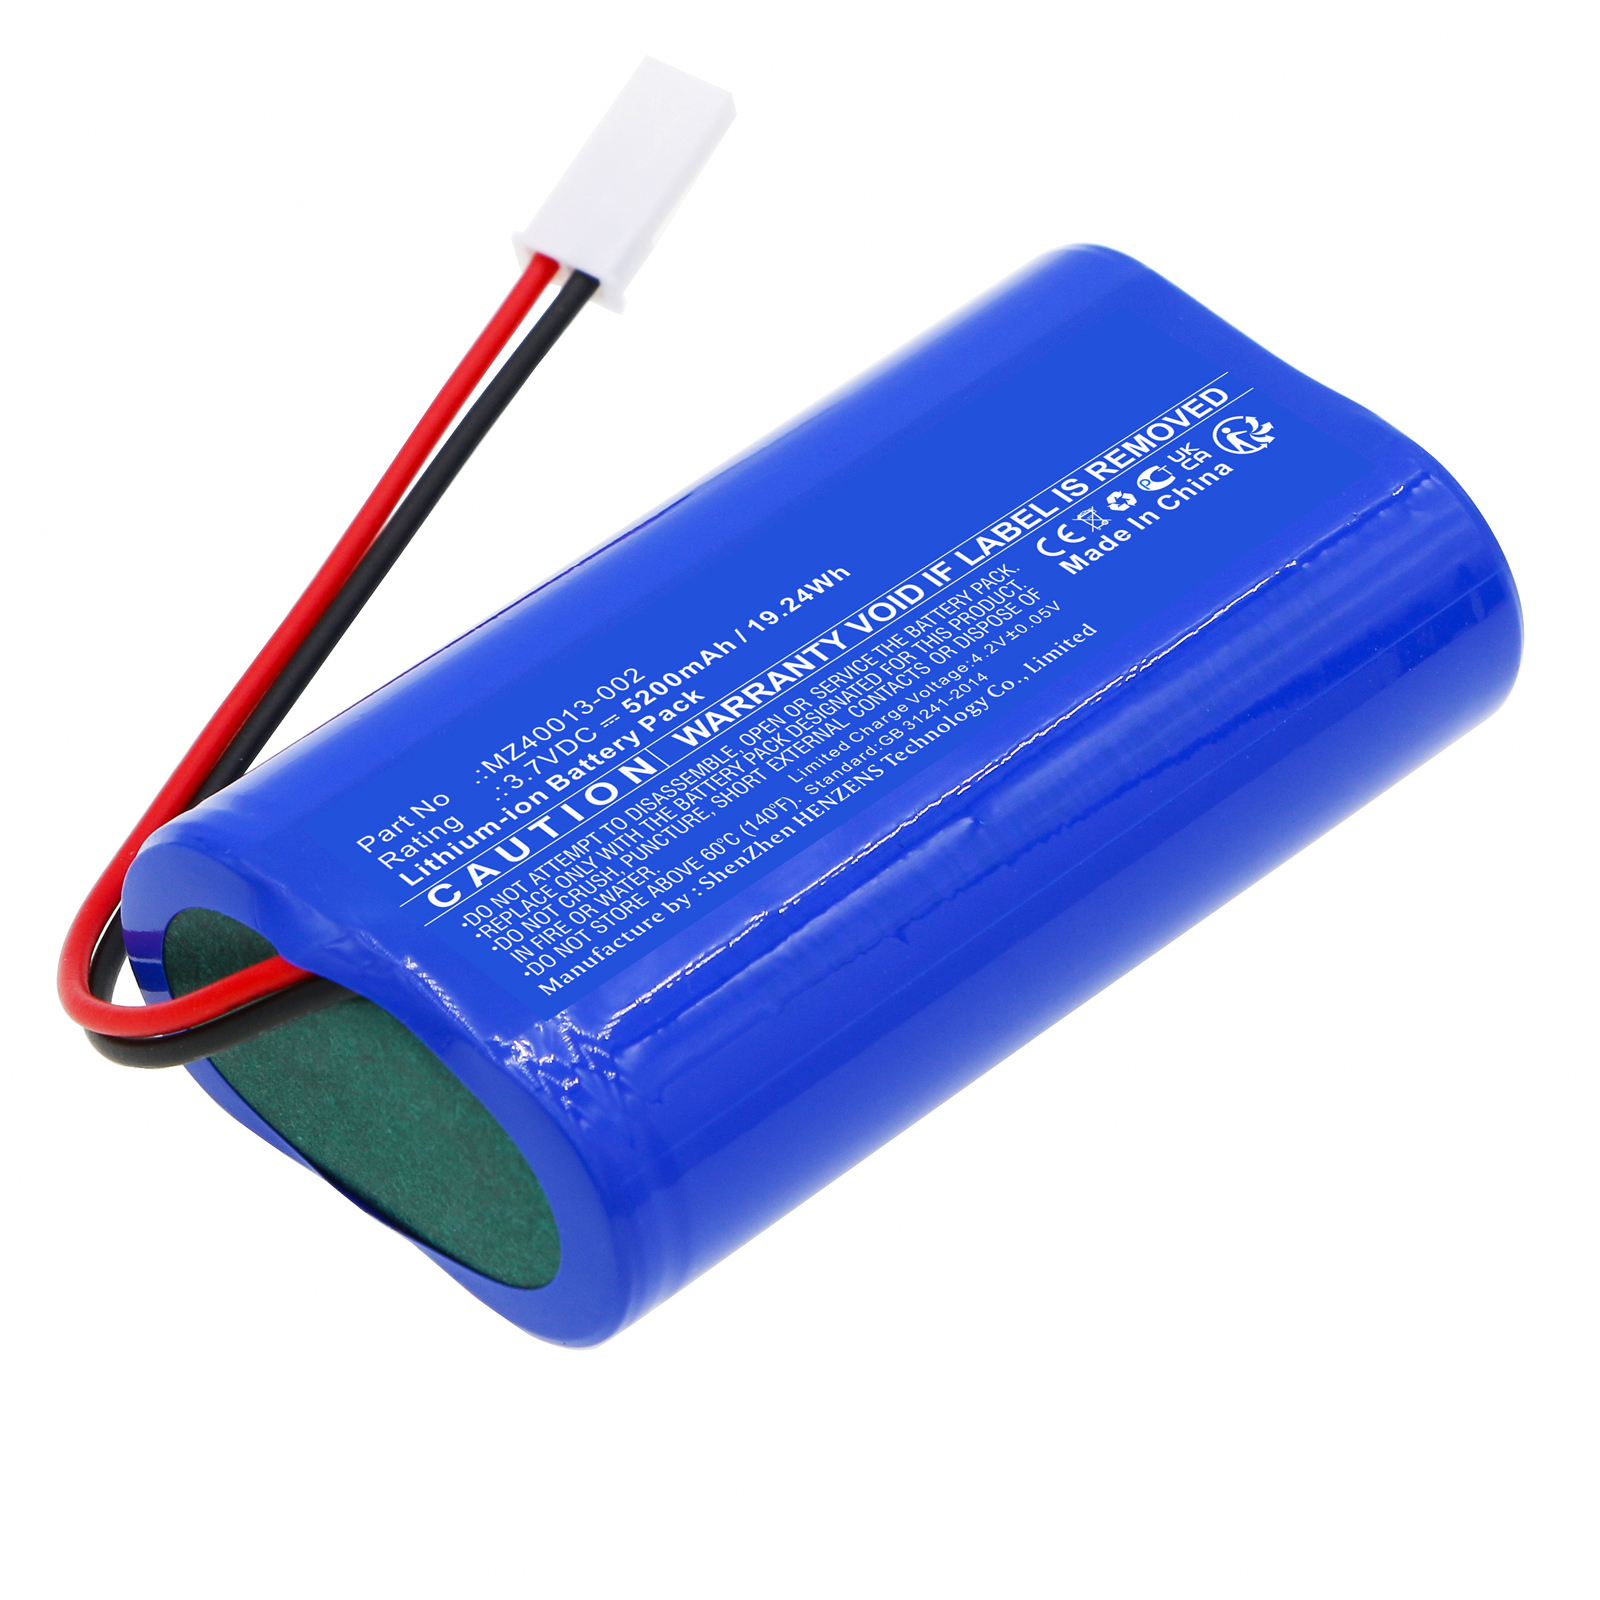 Synergy Digital Medical Battery, Compatible with ADE MZ40013-002 Medical Battery (Li-ion, 3.7V, 5200mAh)